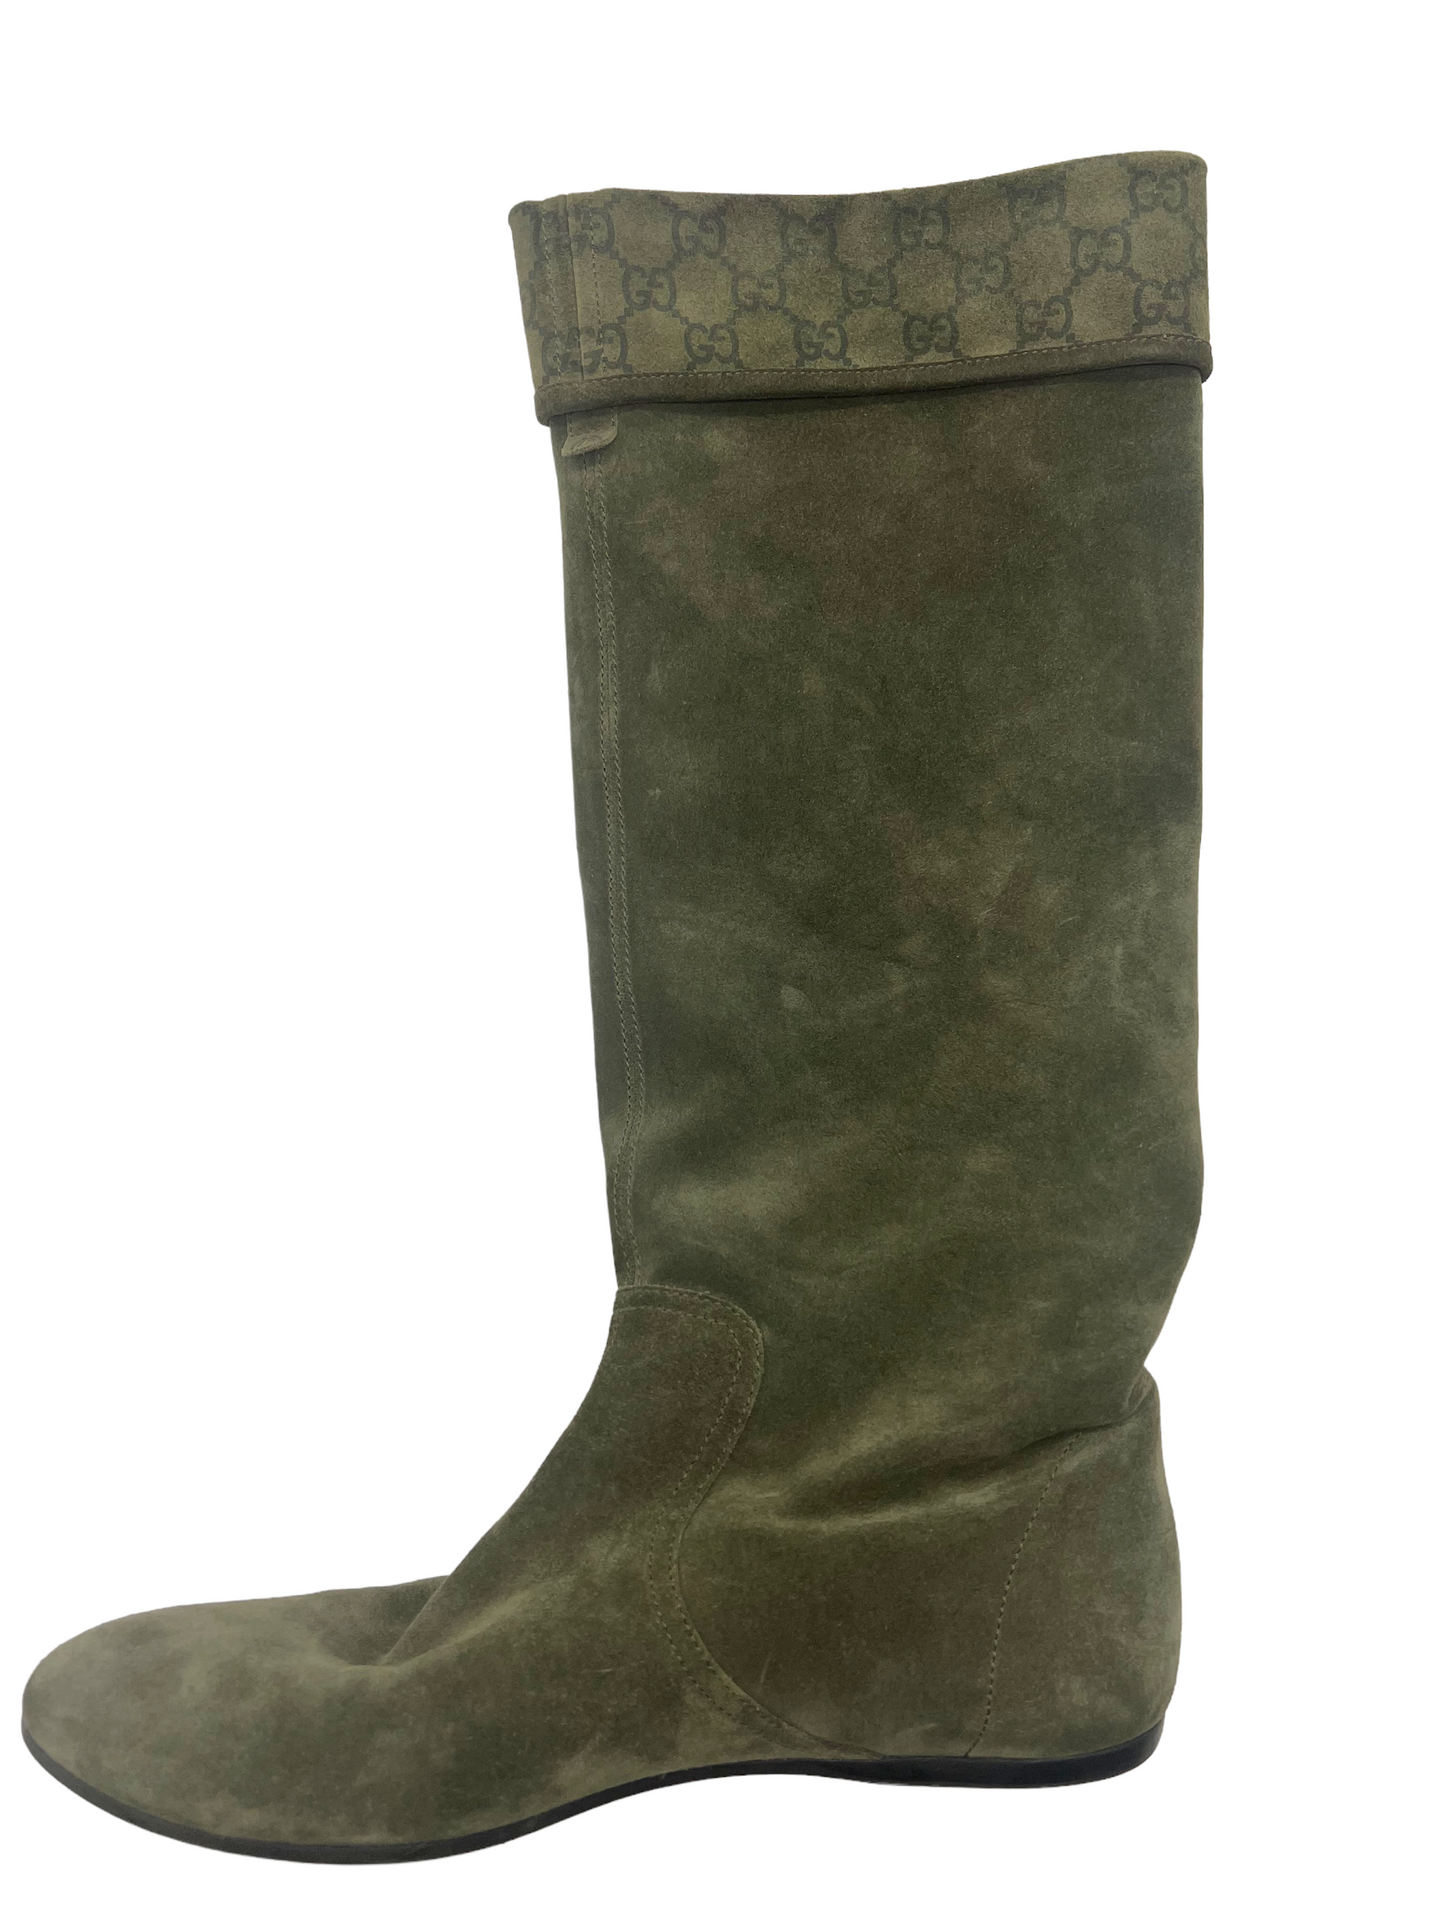 Gucci Green Suede Foldover GG Size 40.5 Boots